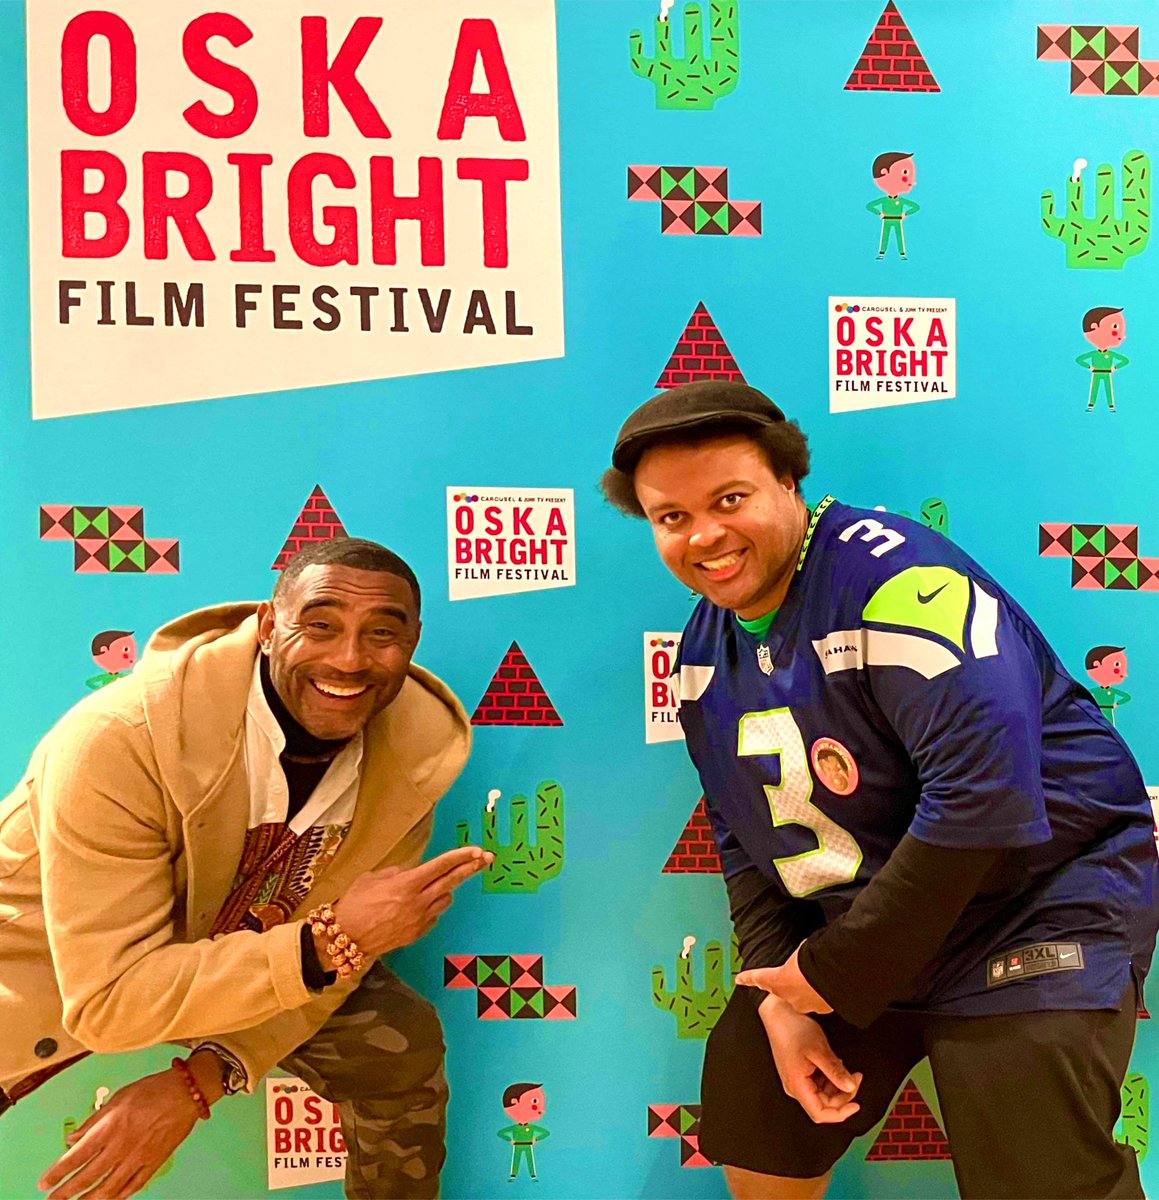 Fantasy A and co-star @TheLogicAmen hopped on a plane to attend our first United Kingdom screening of Fantasy A Gets a Mattress at the @OskaBright Film Festival. That’s a long way to go, but it’s just one stop in the path to film glory. Next stop: New York City!!!